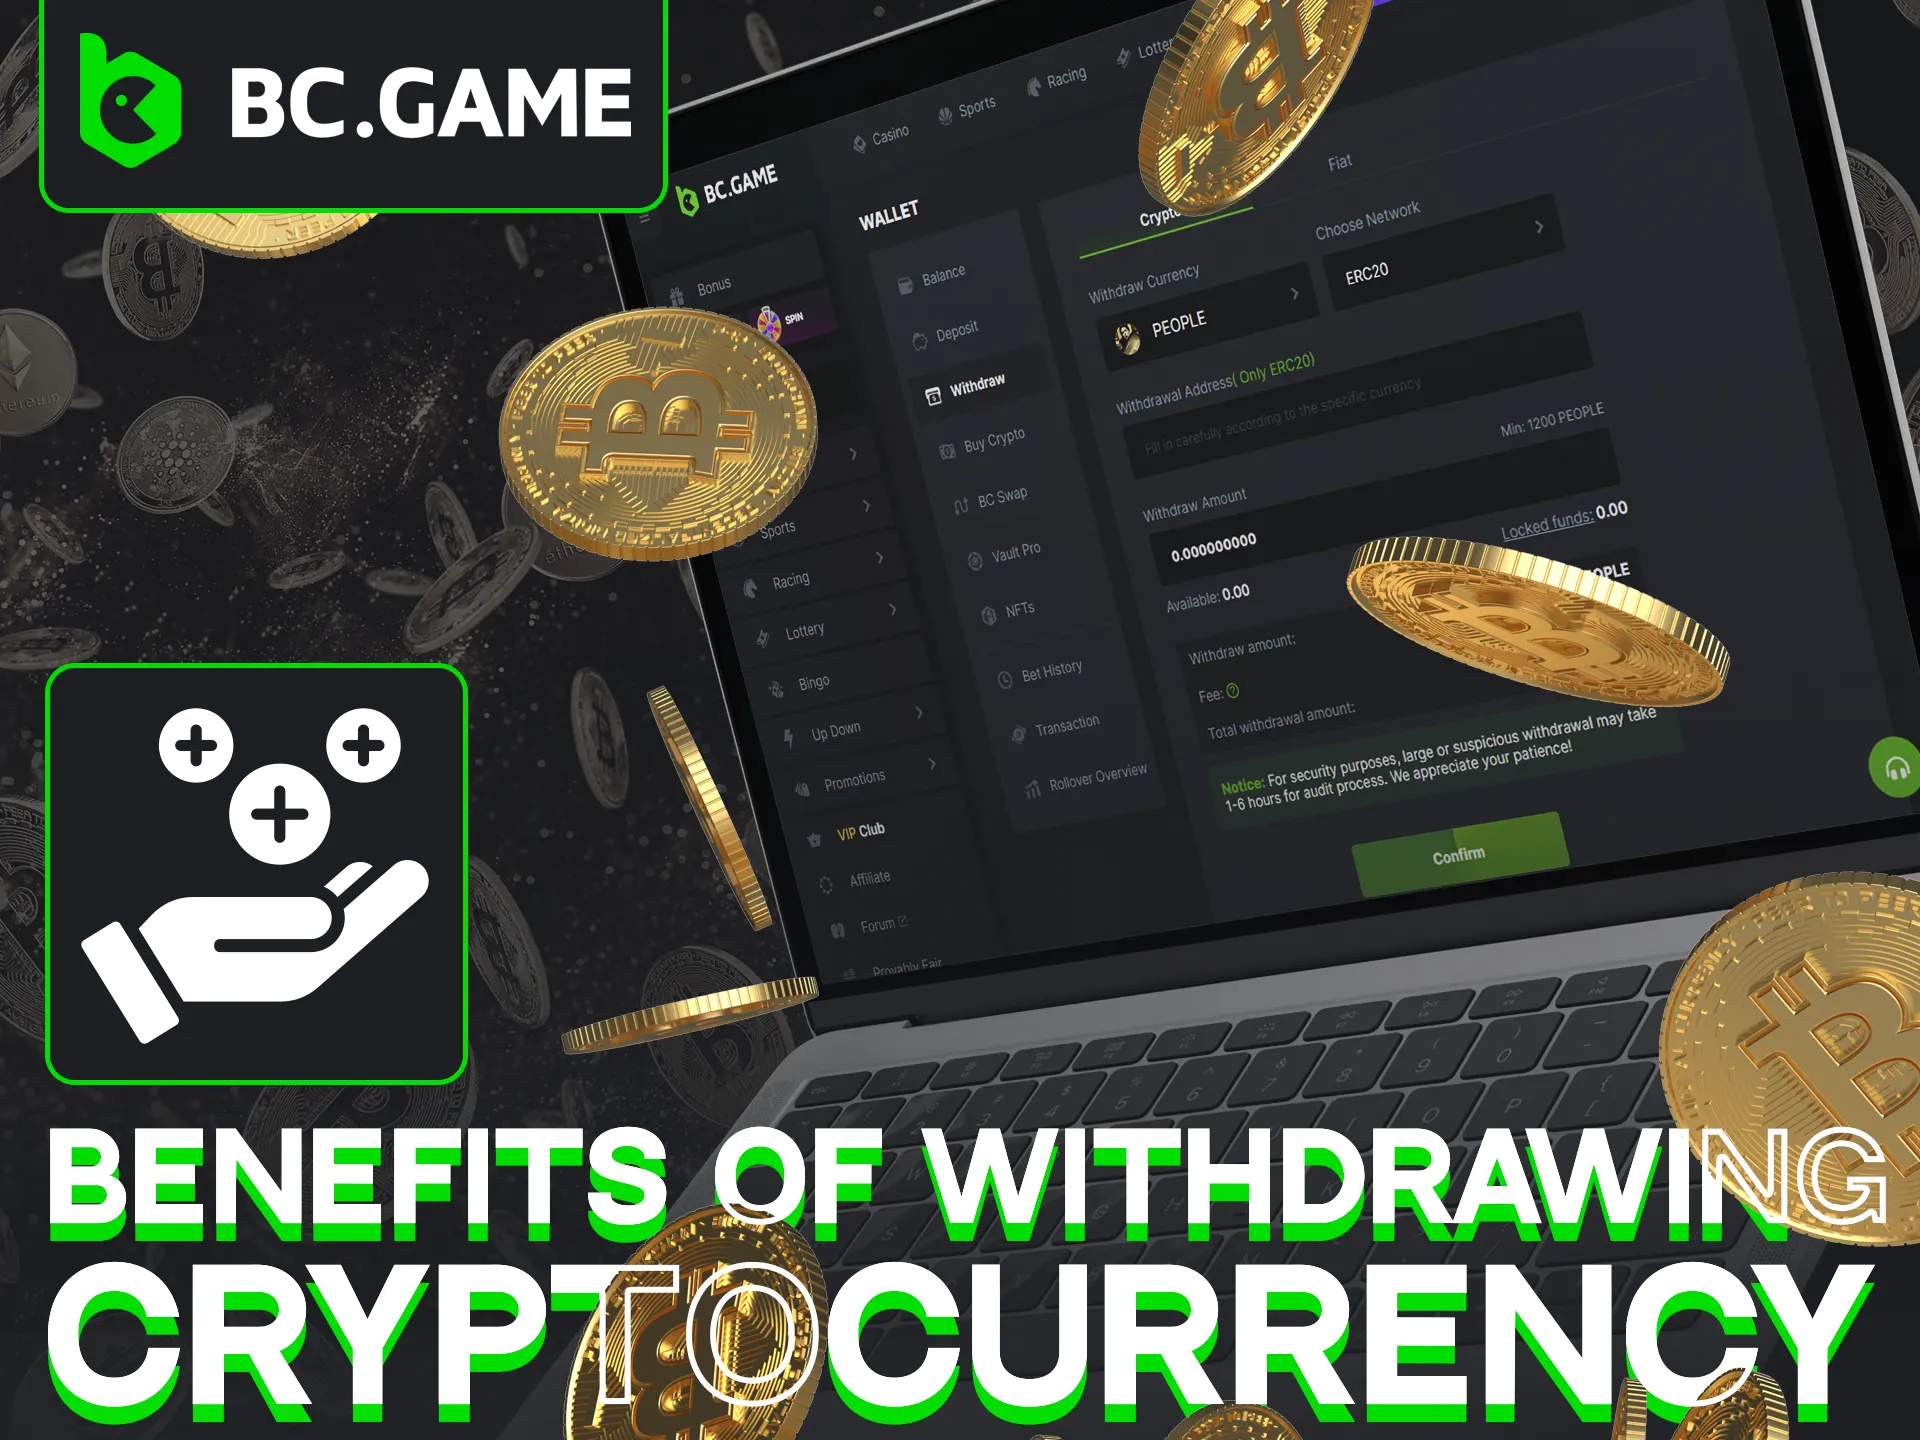 Learn about benefits of cryptocurrency withdrawal at BC Game.